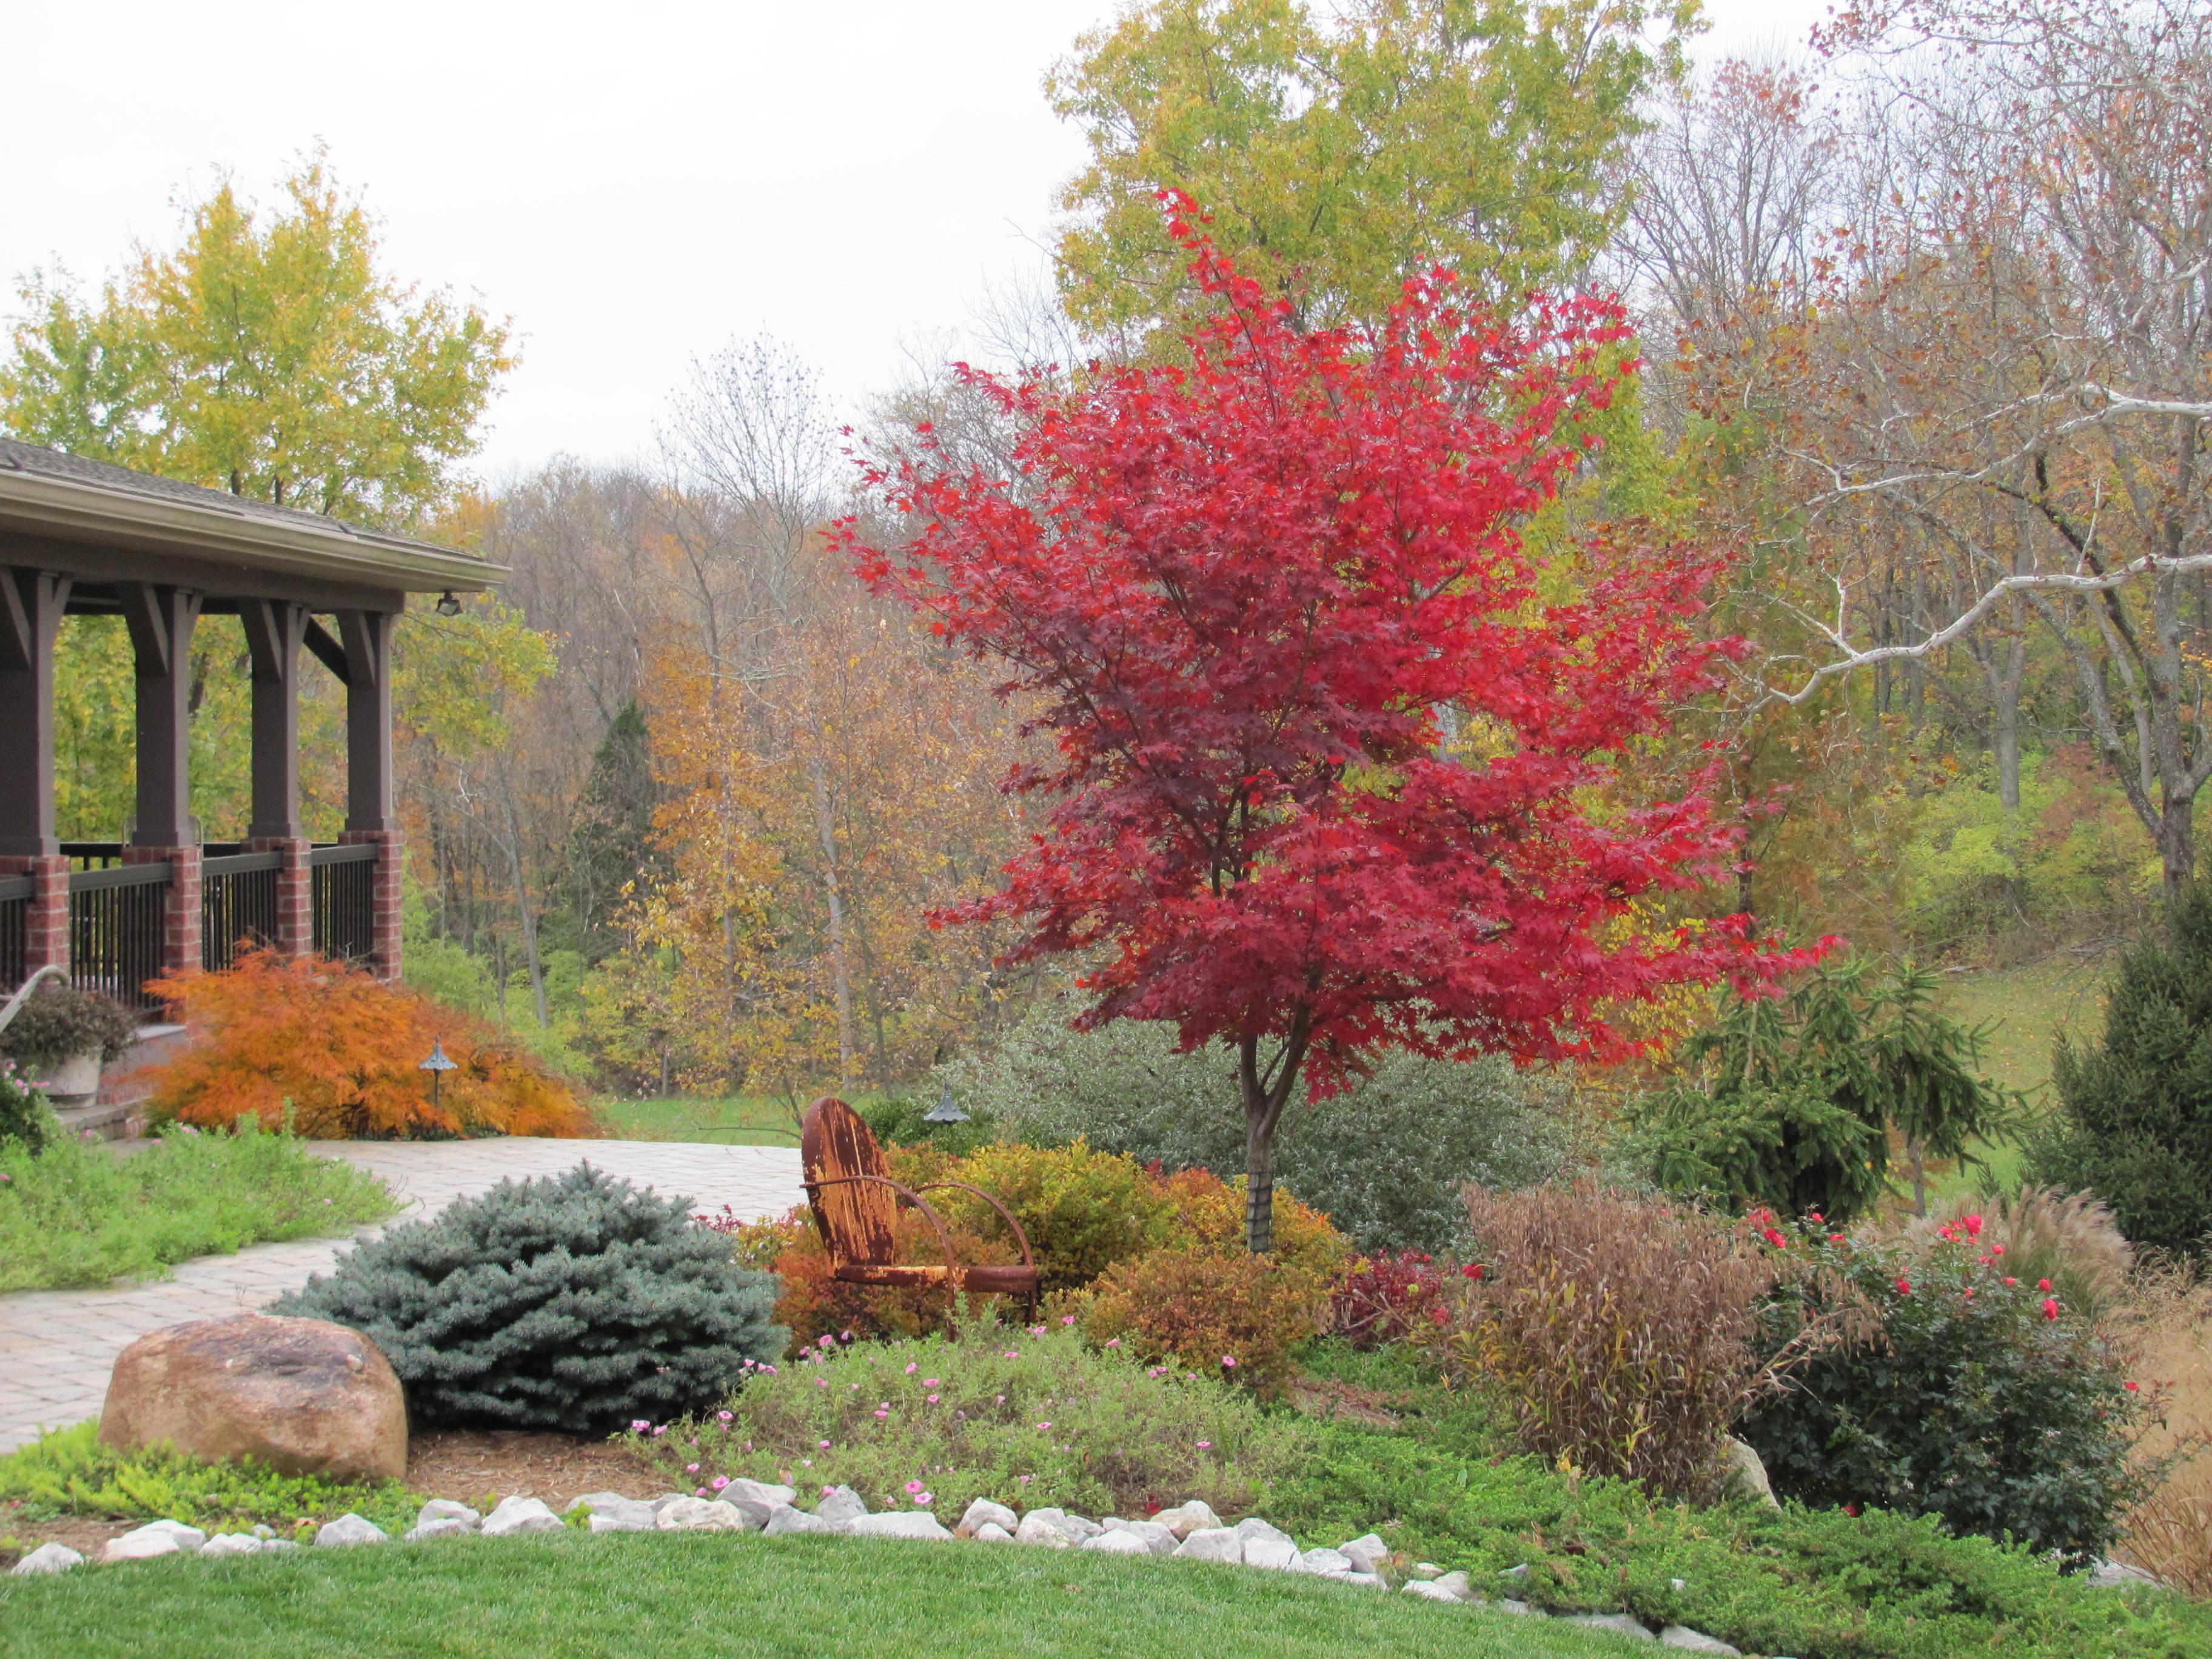 Best Small Trees for Fall Color: Favorites for red, orange, and yellow fall foliage